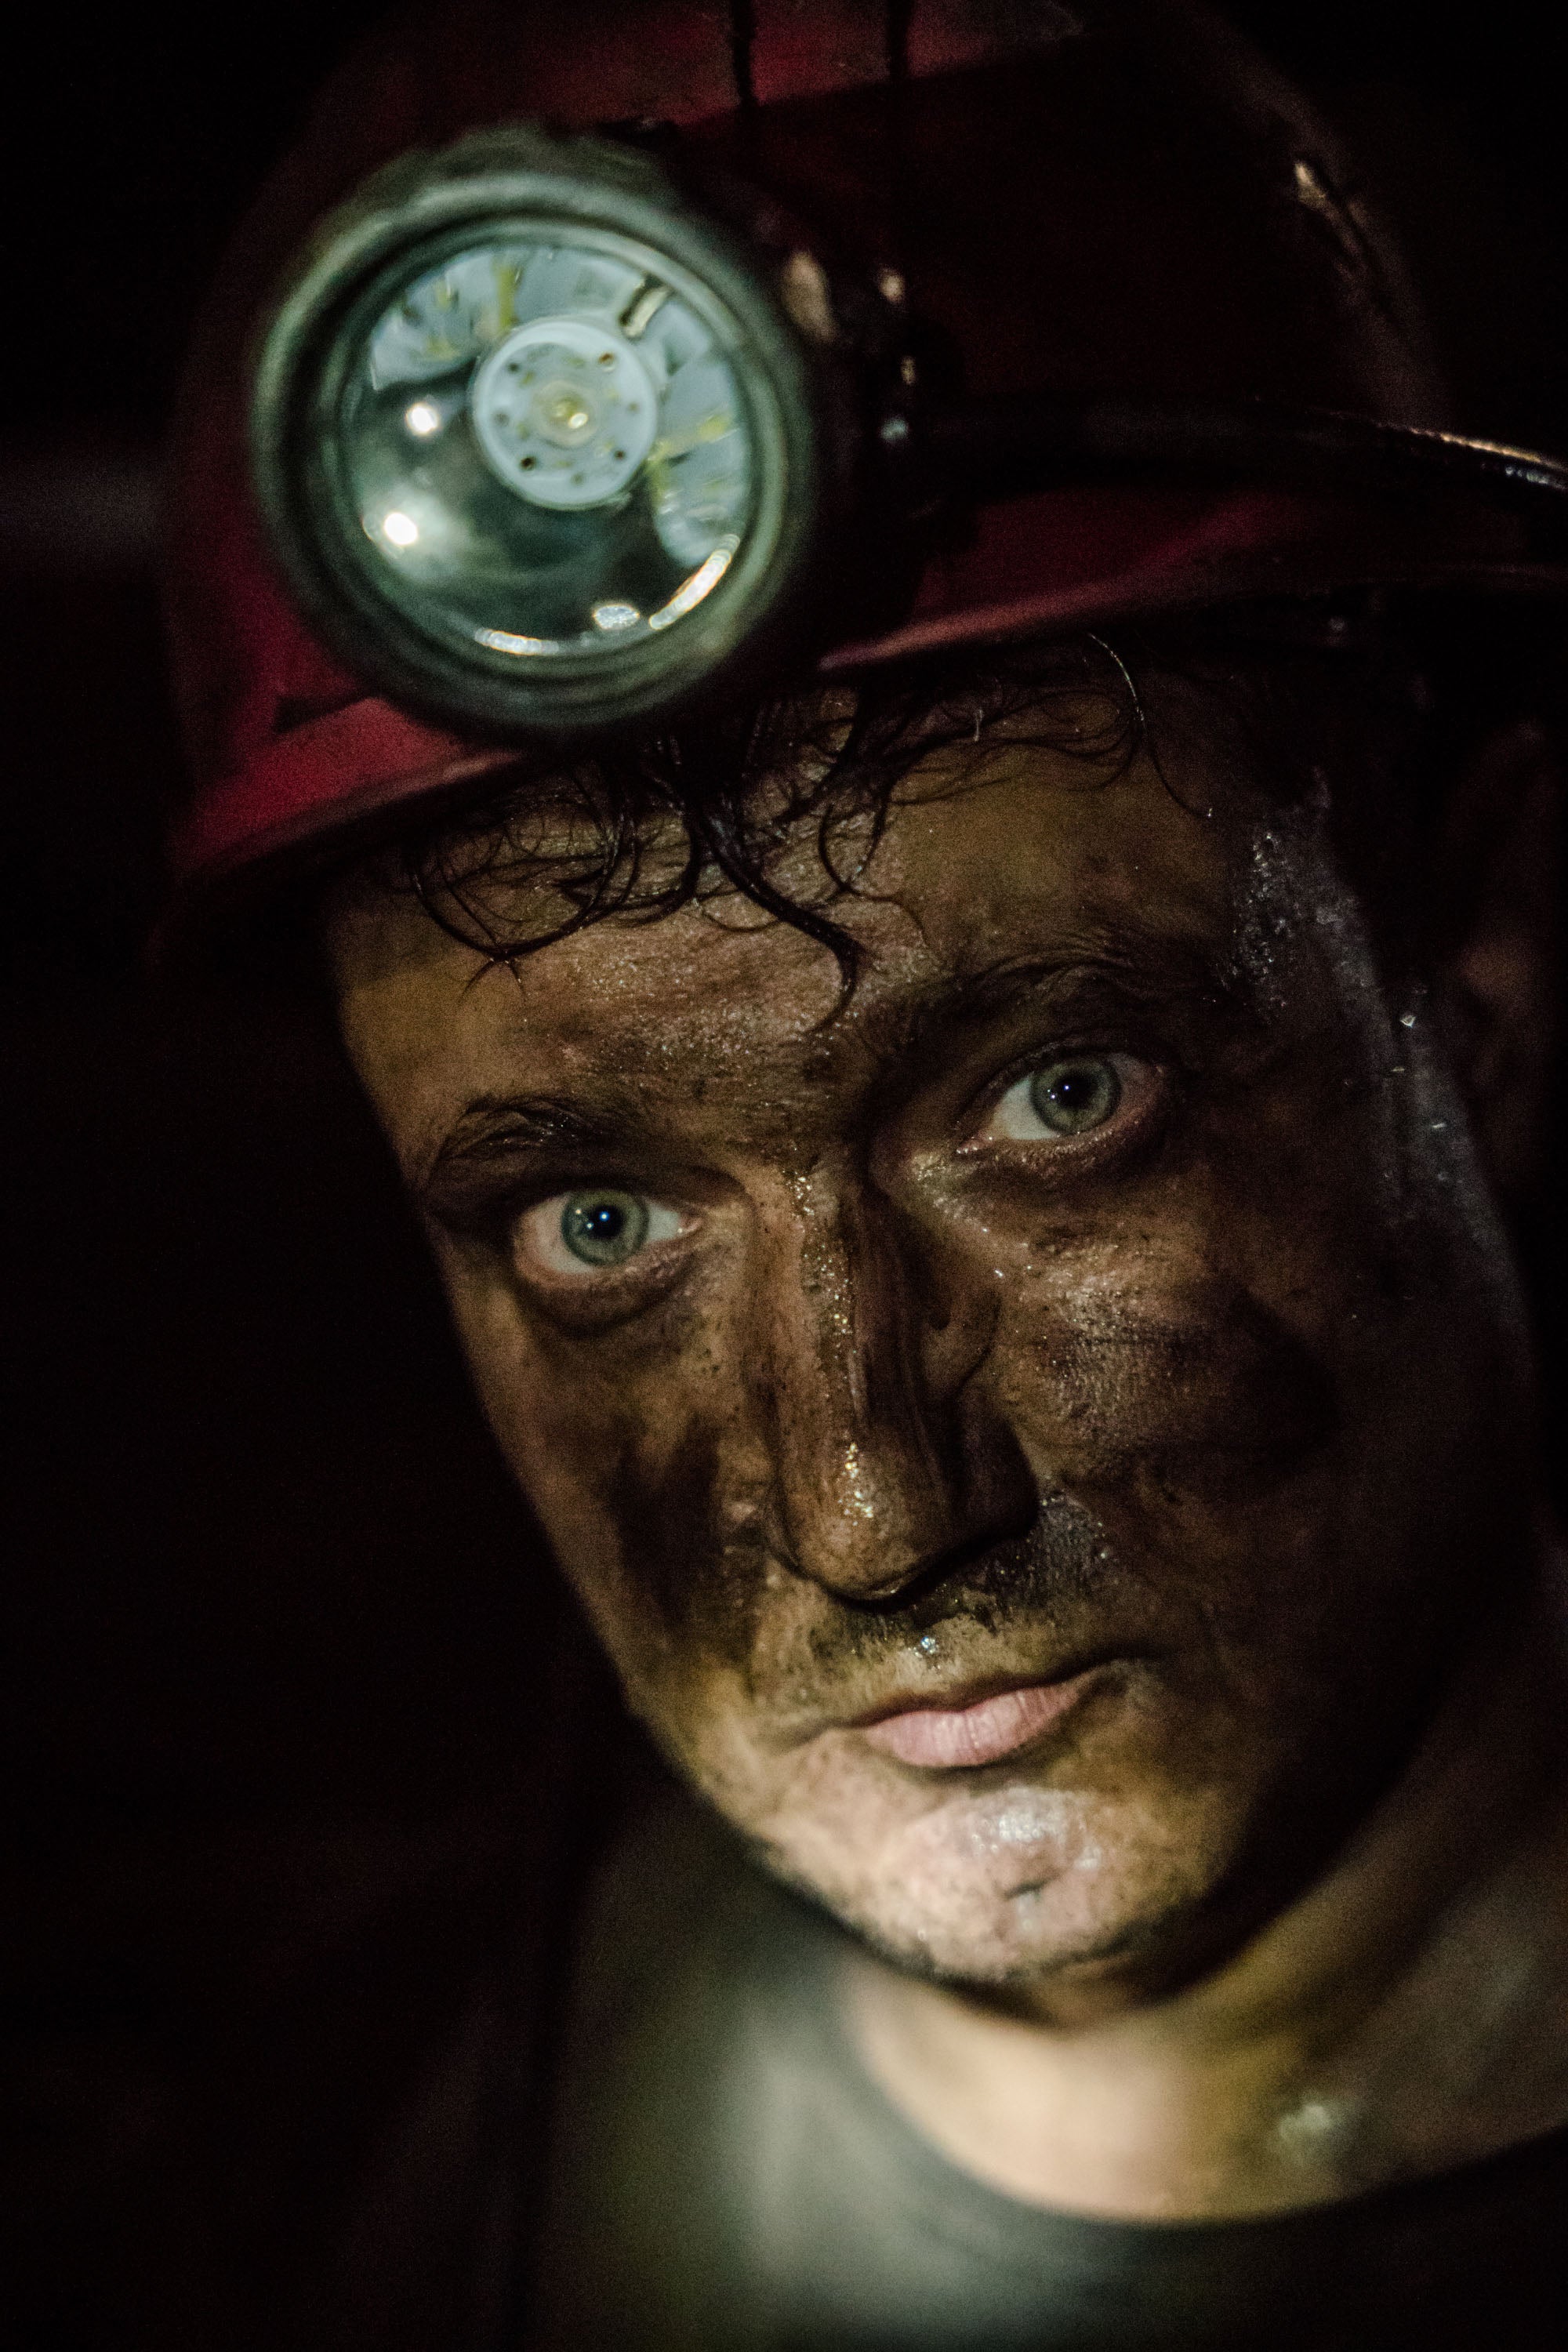 The war has made coal mining more dangerous as well as more critical